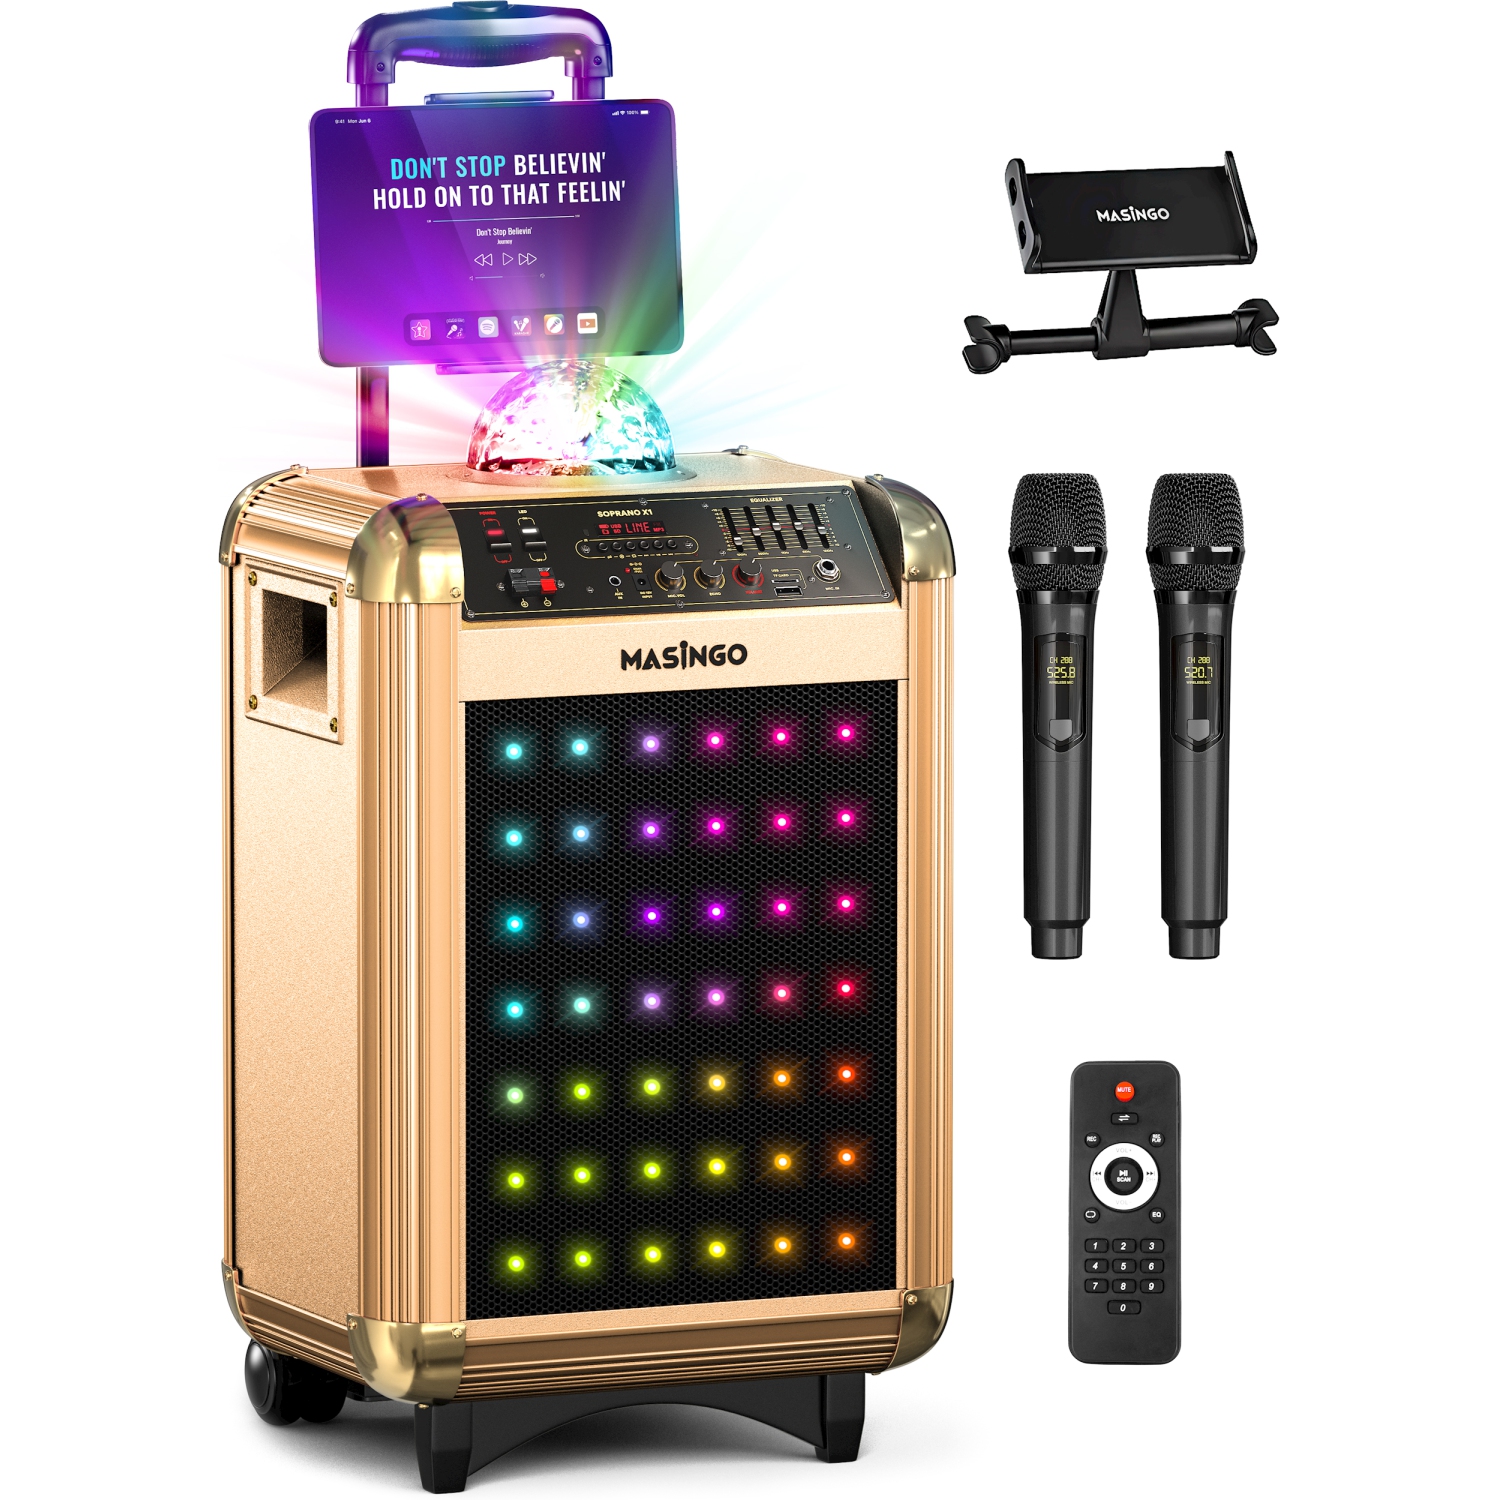 MASINGO Karaoke Machine for Adults & Kids with 2 Wireless Microphones - Portable PA Speaker System w/Two Bluetooth Mics, Party Lights, Lyrics Display Holder & TV Cable - Soprano X1